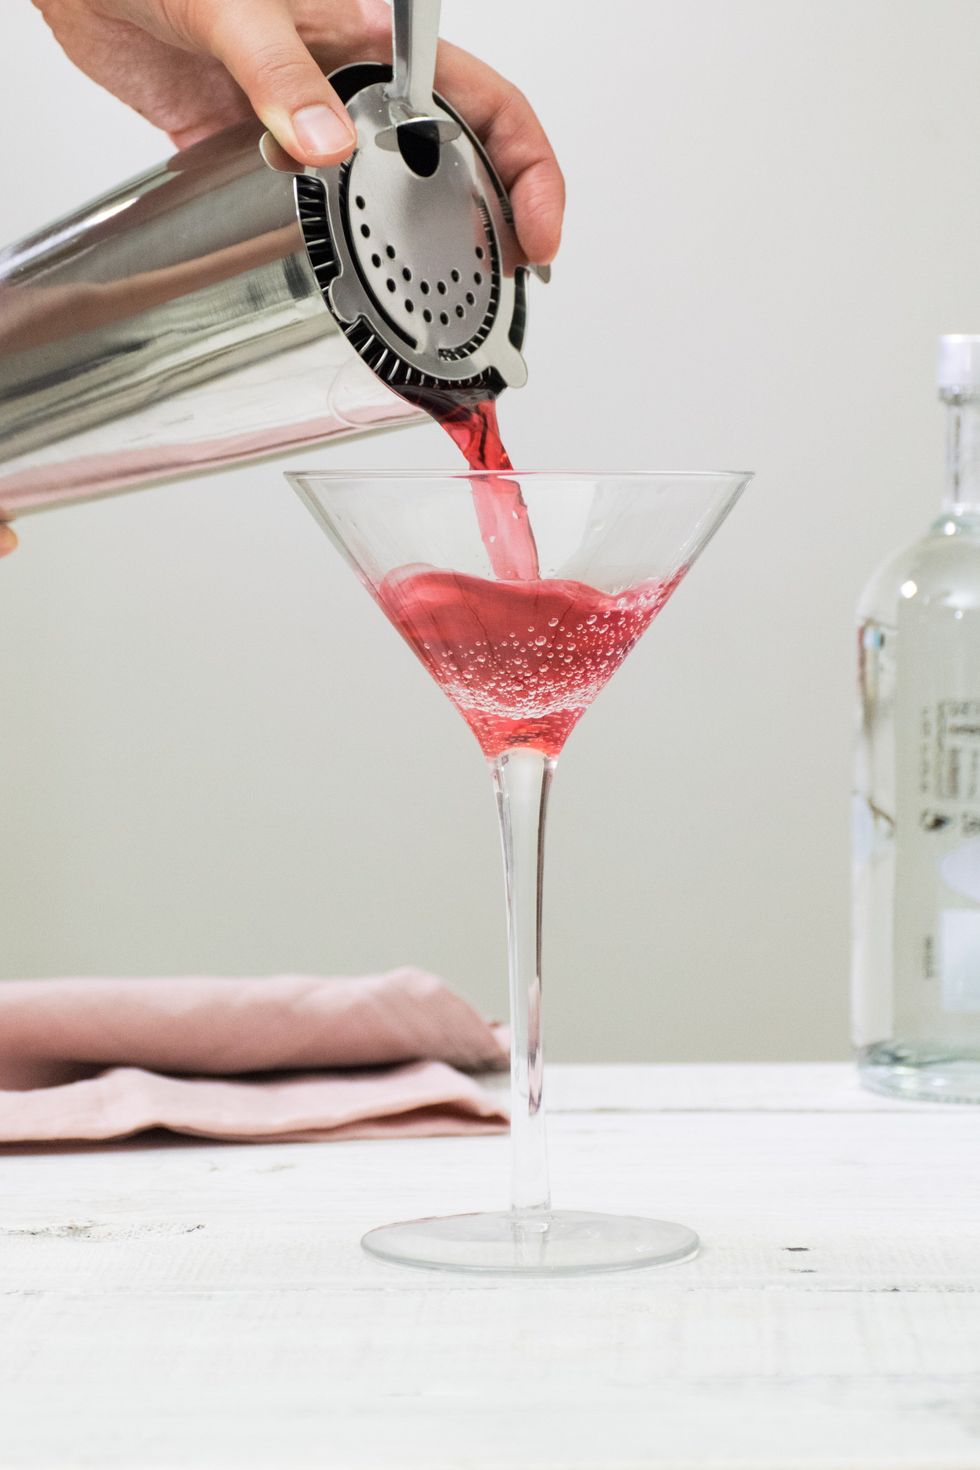 The Raspberry Lemon Drop Martini Is My Summer Go-To Drink — Here's My Recipe